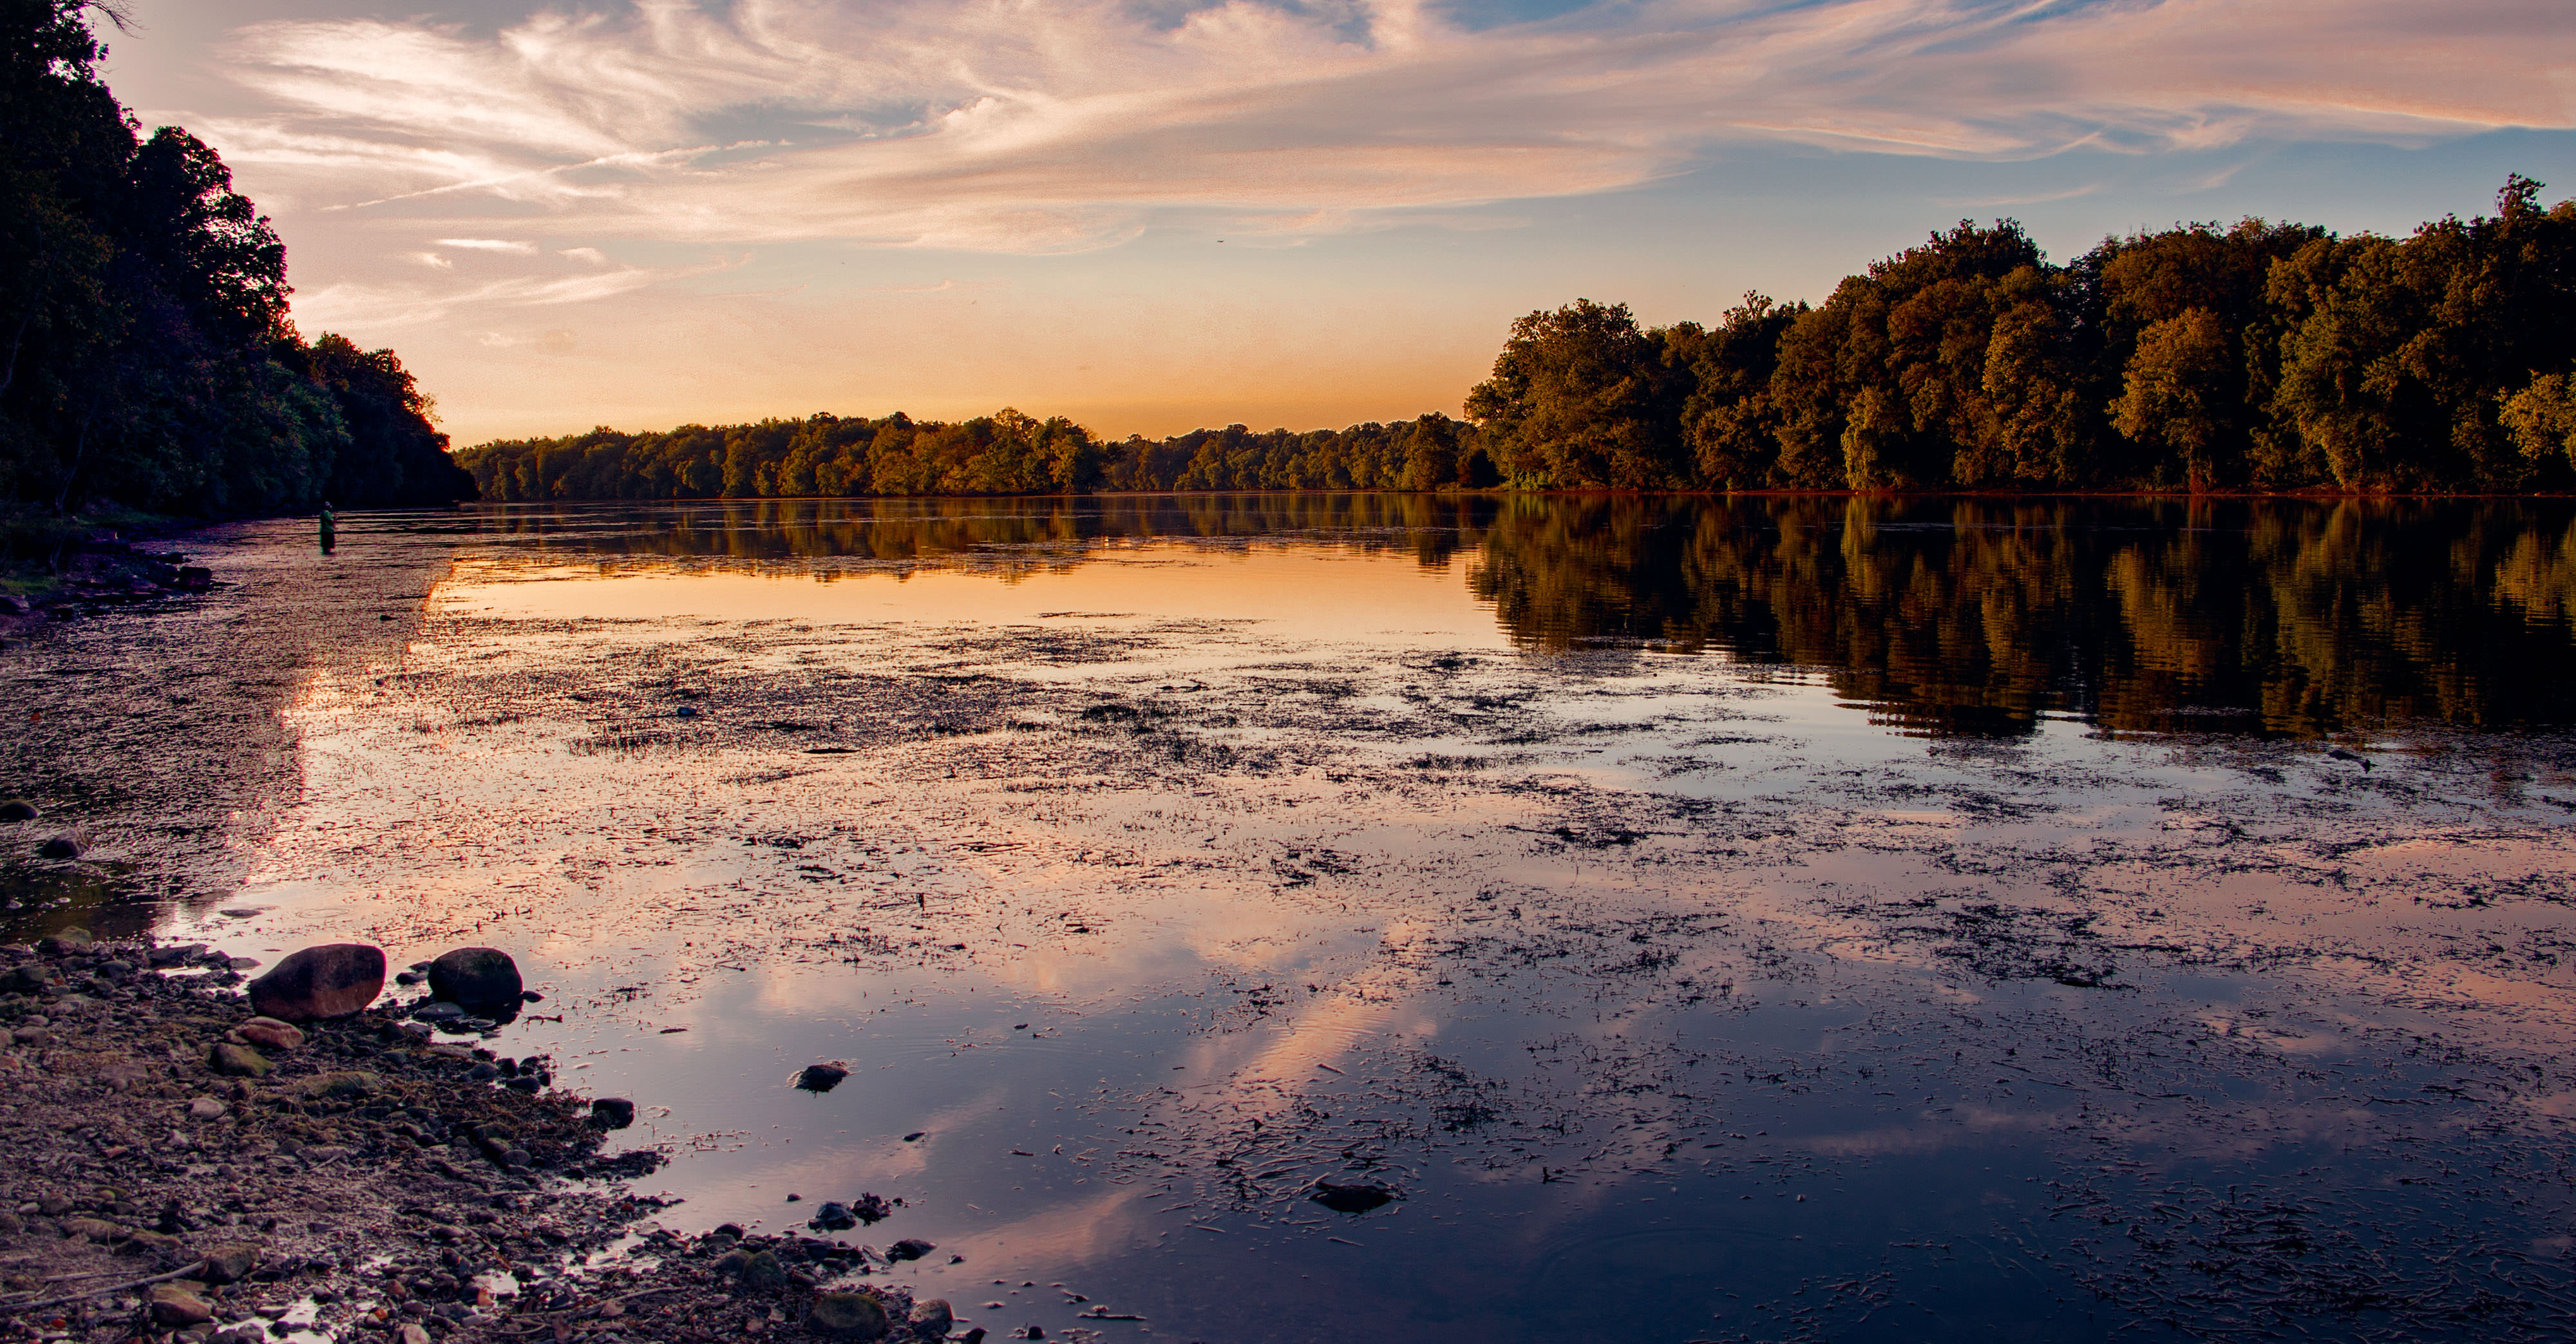 Green trees edge the banks of the Potomac River at dusk. Vegetation floats at the surface at the shallow water. 